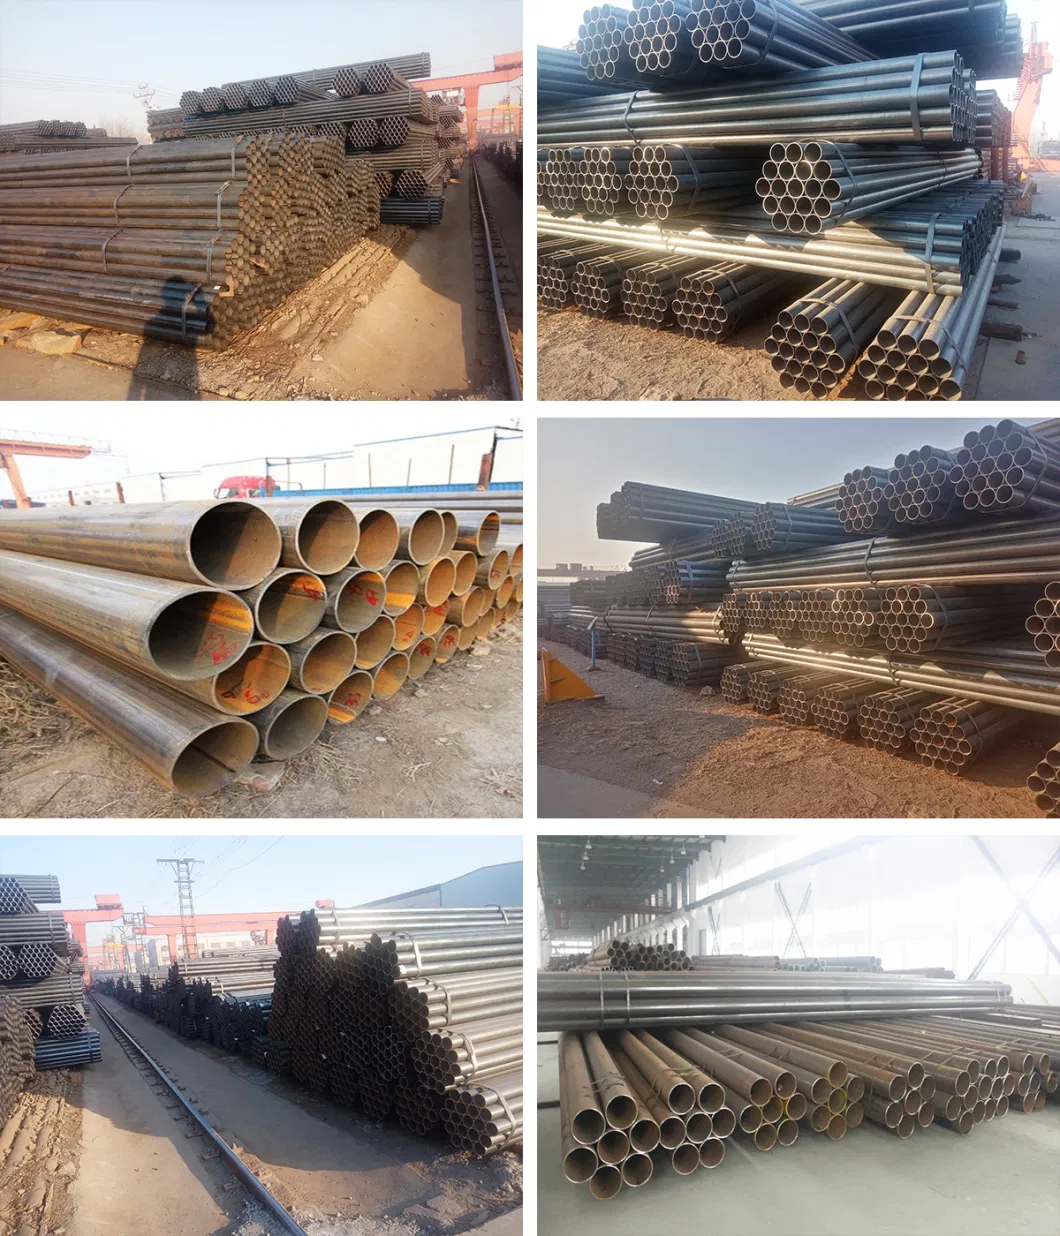 St37 St52 Metal Iron Steel Pipe Alloy Round Tube Titanium Pipe Seamless Steel Pipe Manufacturer